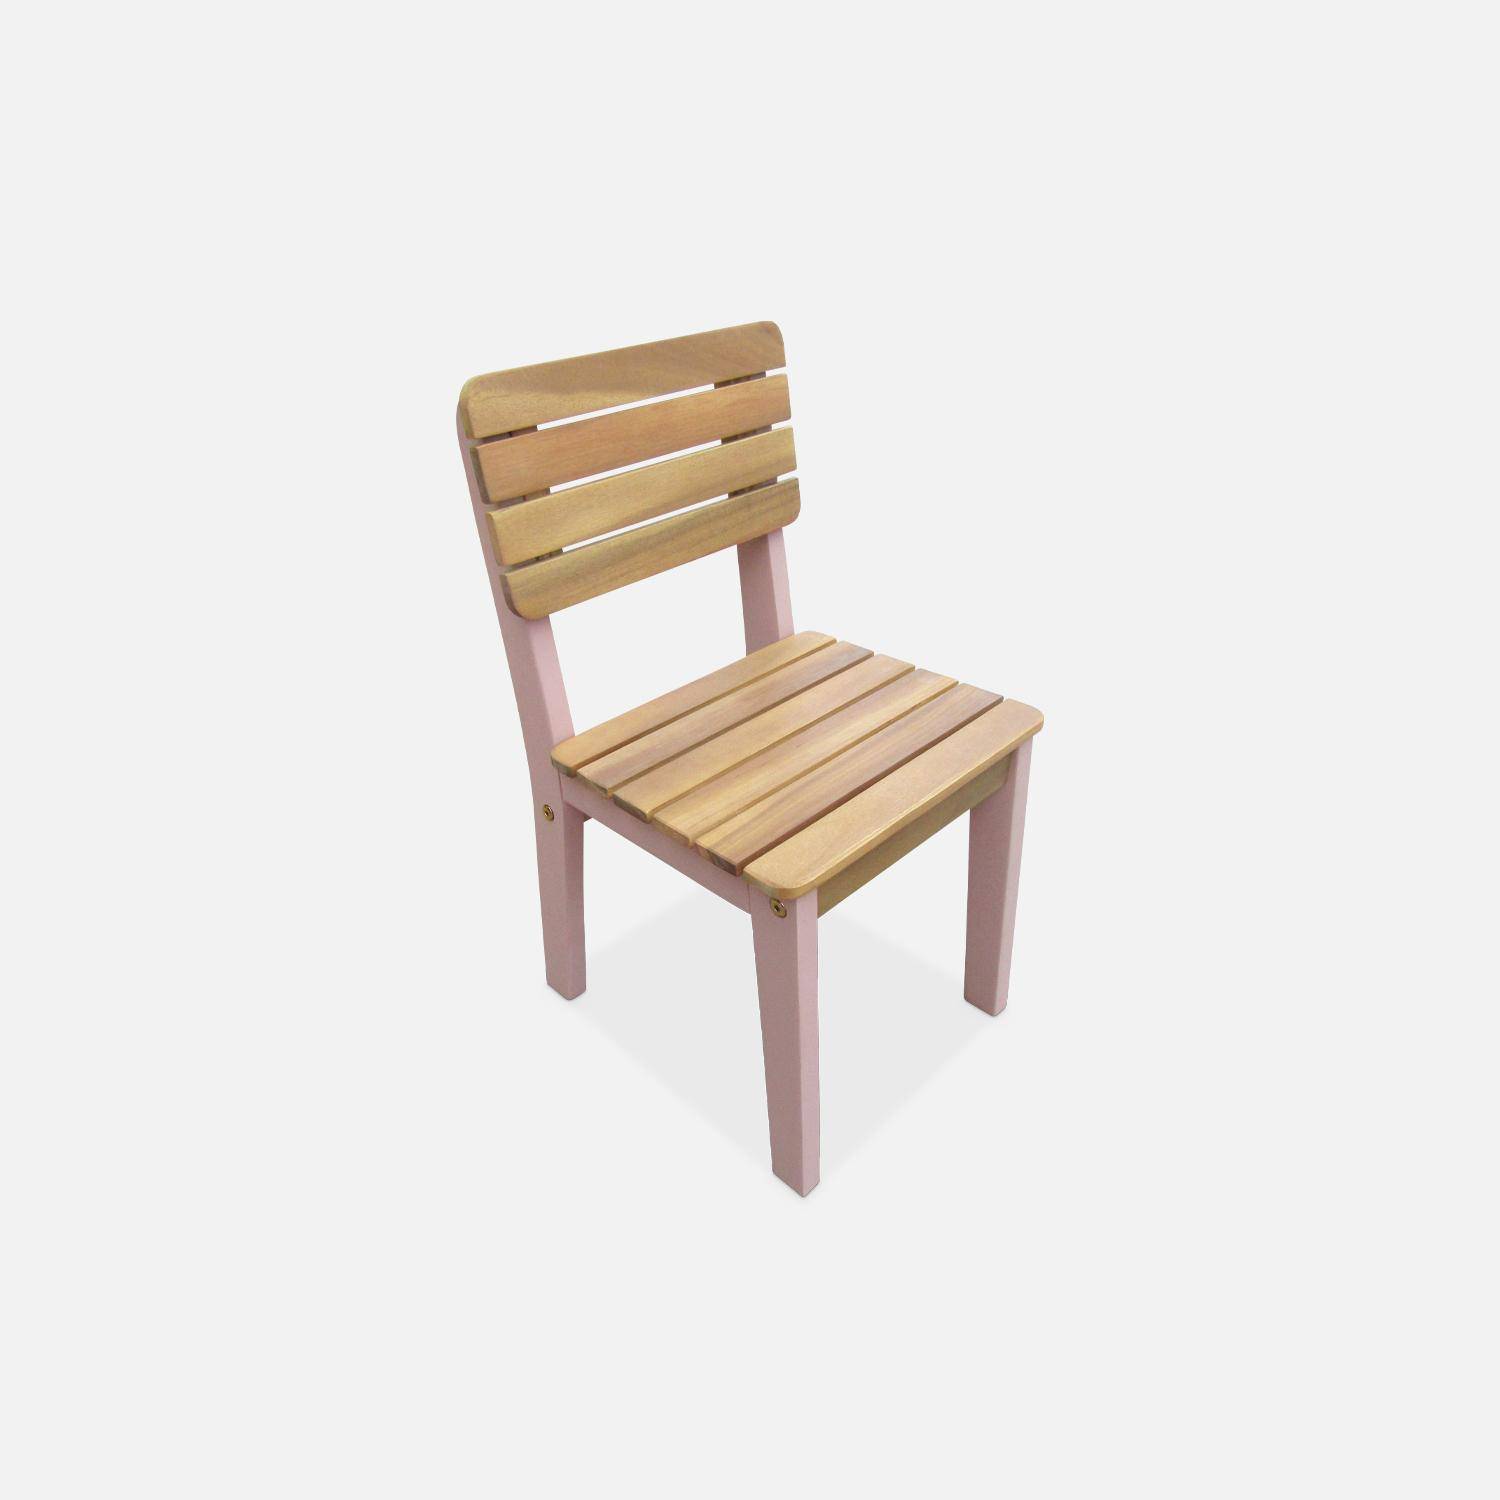 Solid Wood Chairs for Children, Indoor/Outdoor (Set of 2), pink, L29 x D31.5 x H53 cm Photo5